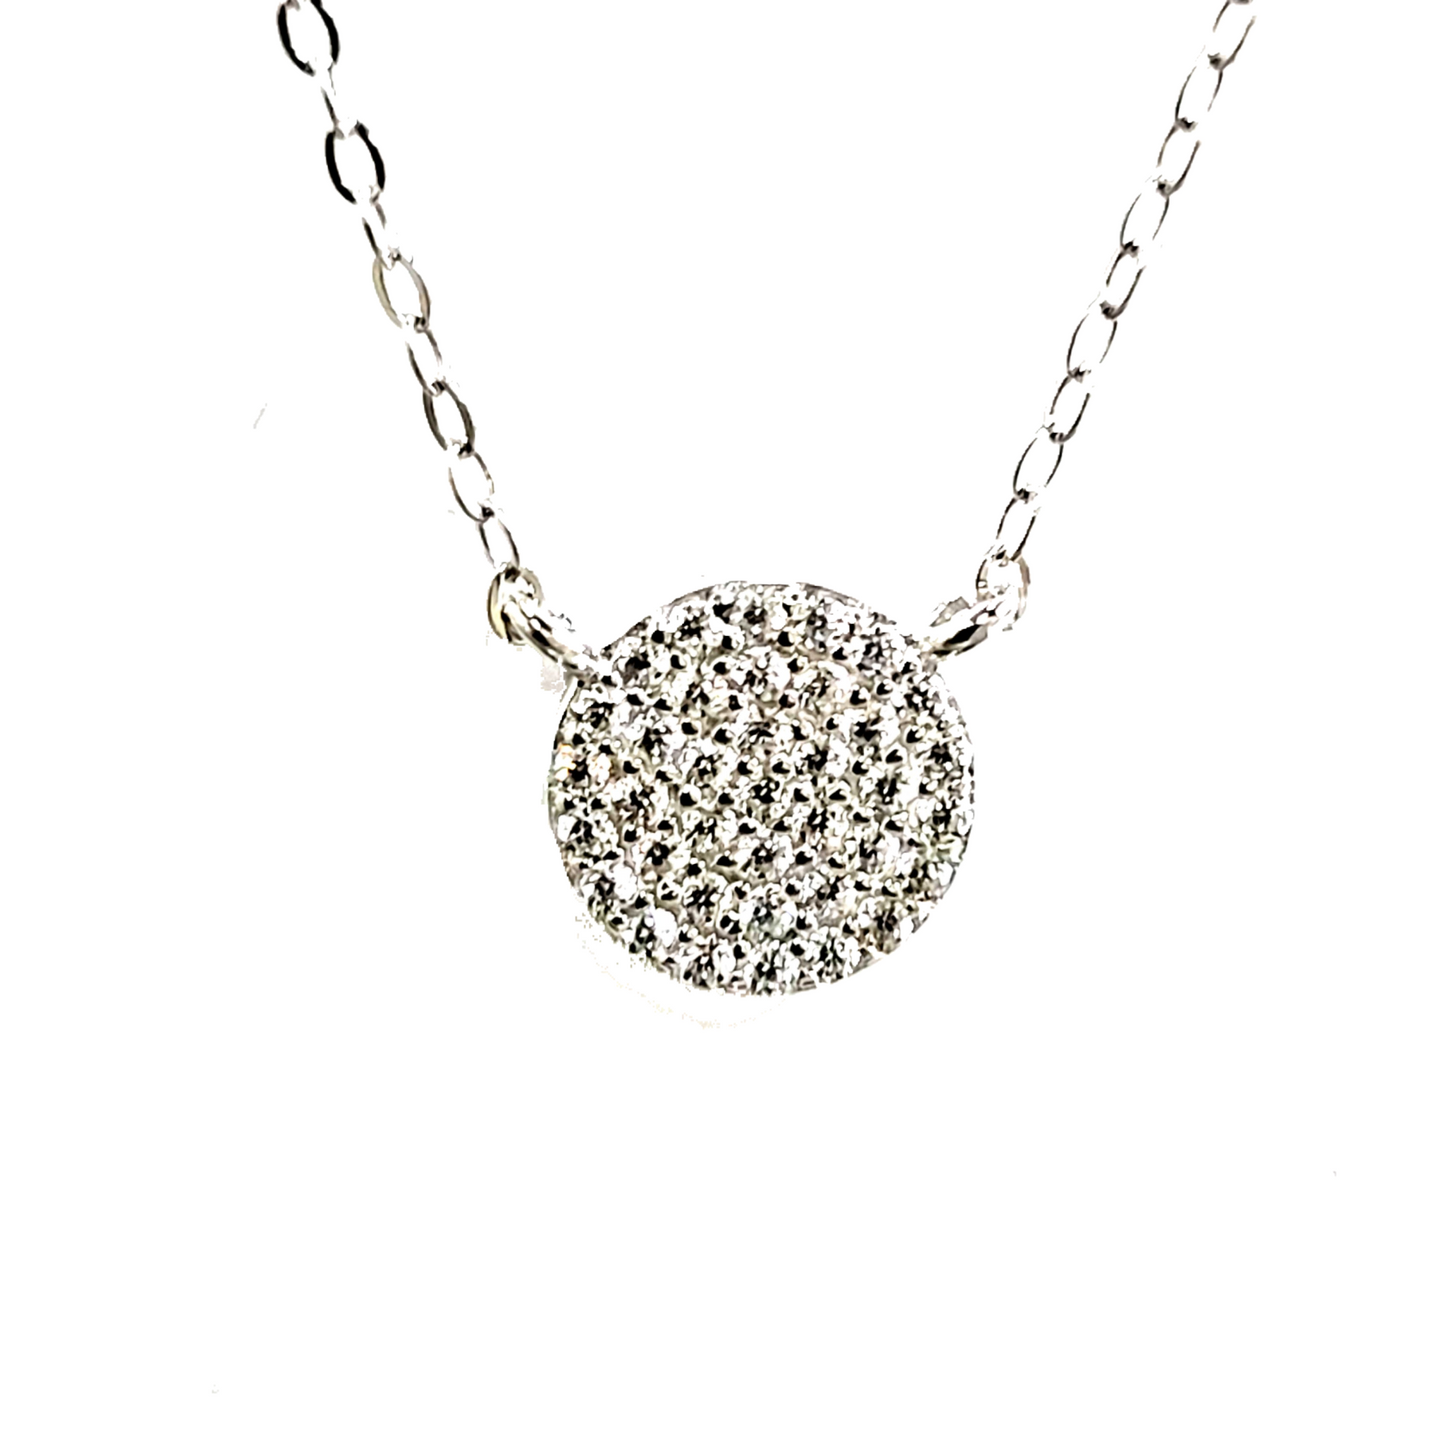 8mm Micropave Disc Necklace - HK Jewels